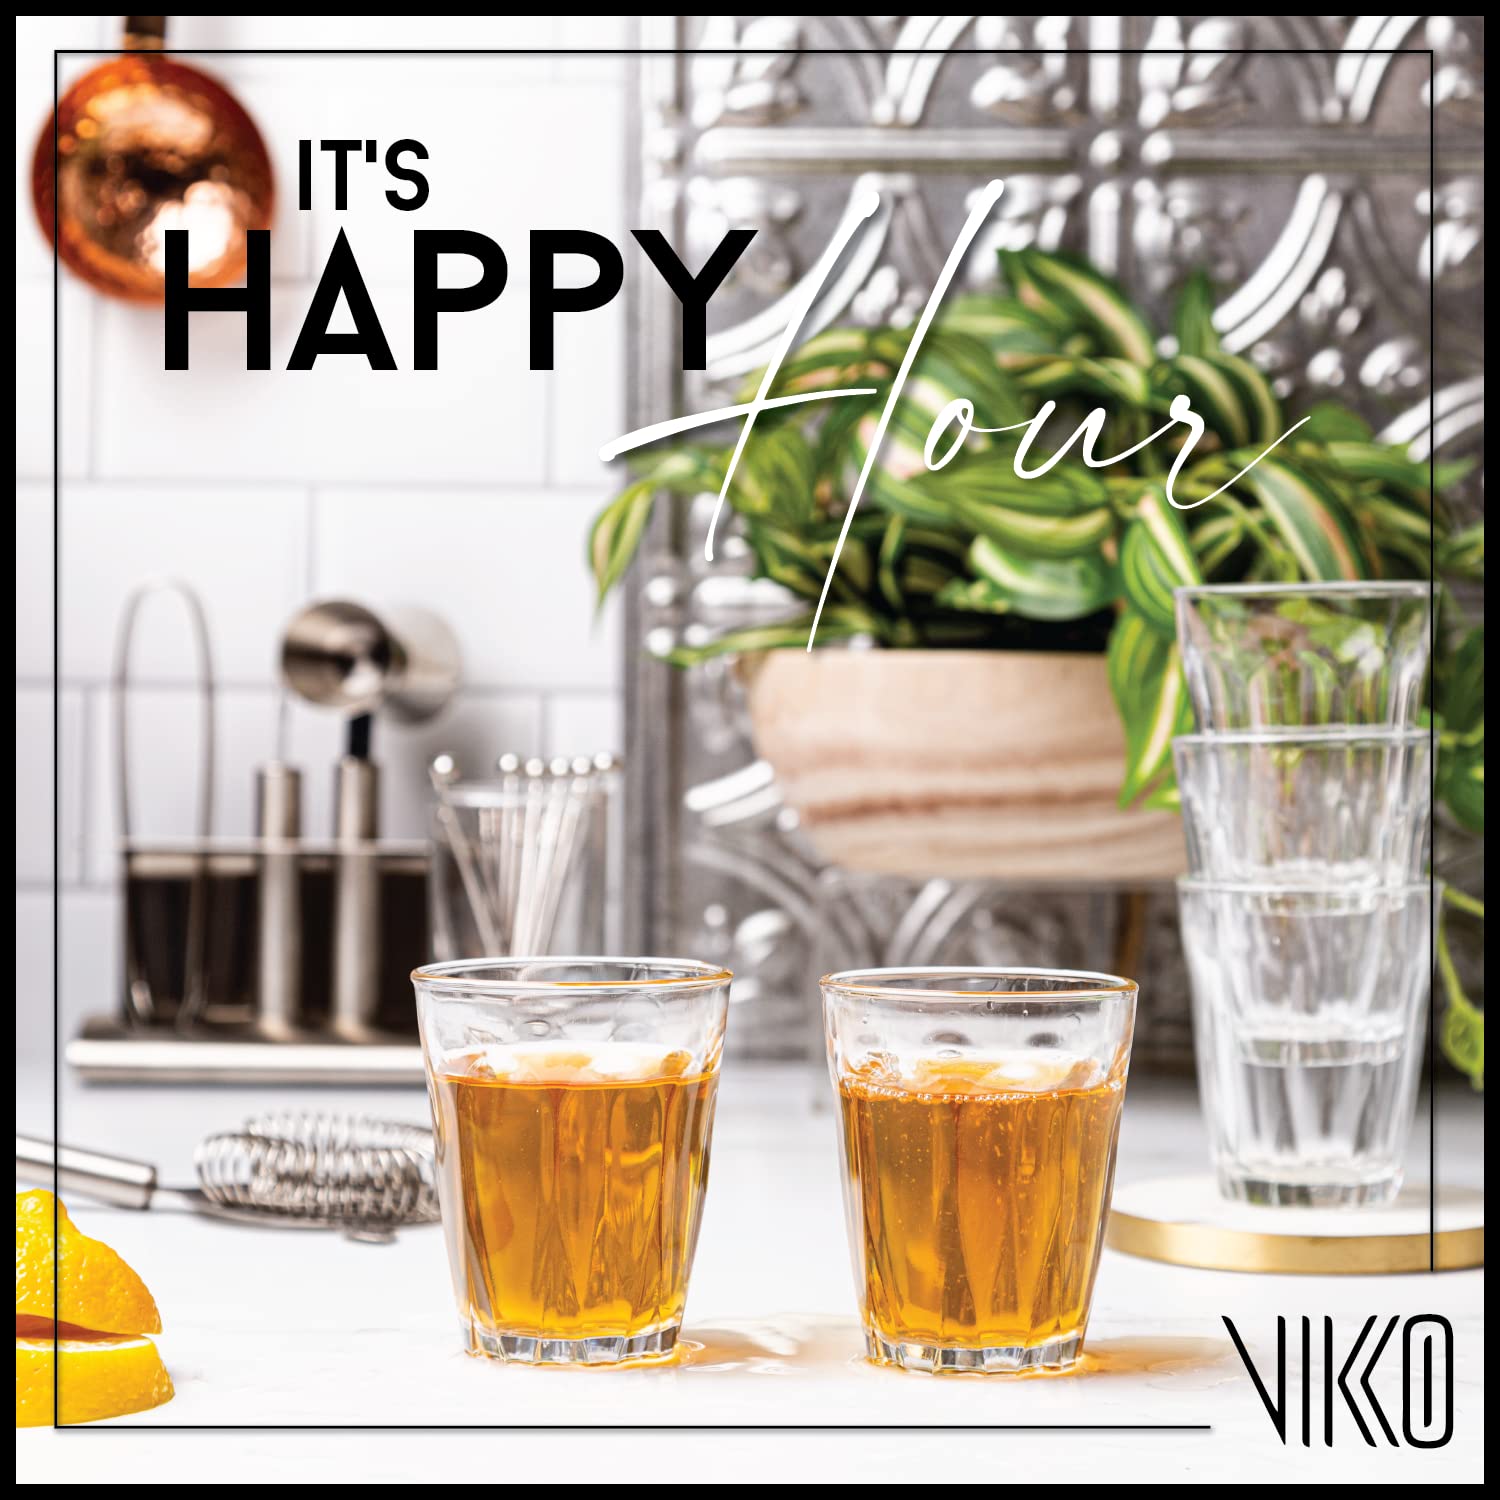 Vikko 3.75 Ounce Shot Glasses, Set of 6 Small Liquor and Spirit Glasses, Durable Tequila Bar Glasses For Alcohol and Espresso Shots, 6 Piece Large Shooter Glass Set